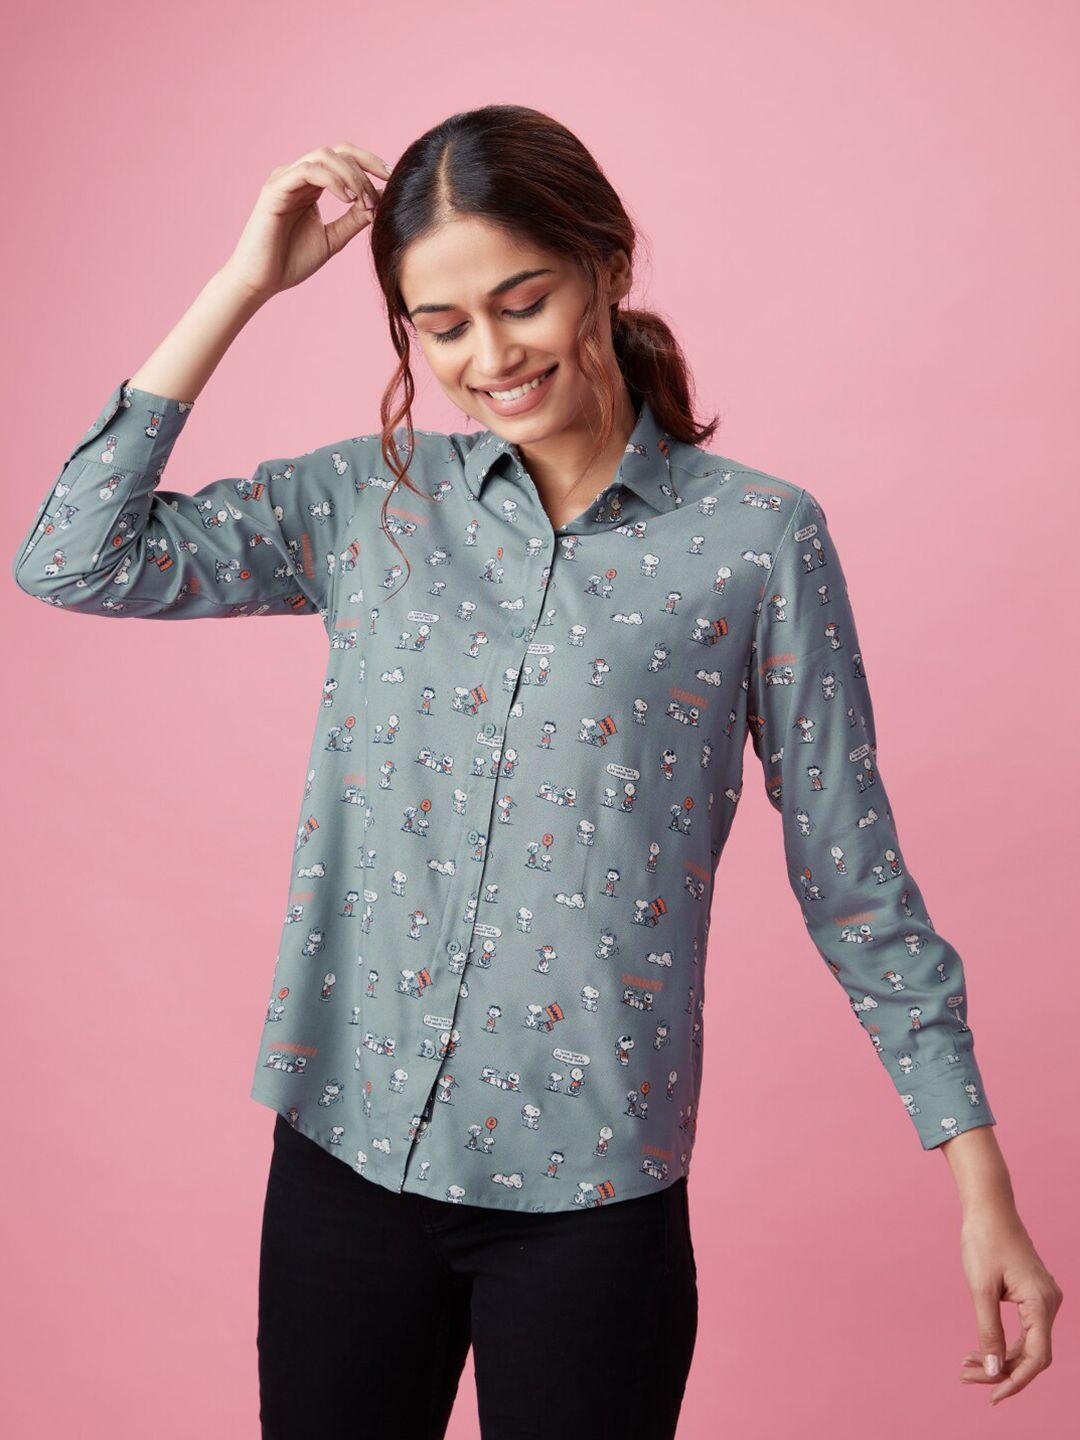 the-souled-store-women-grey-modern-printed-casual-shirt